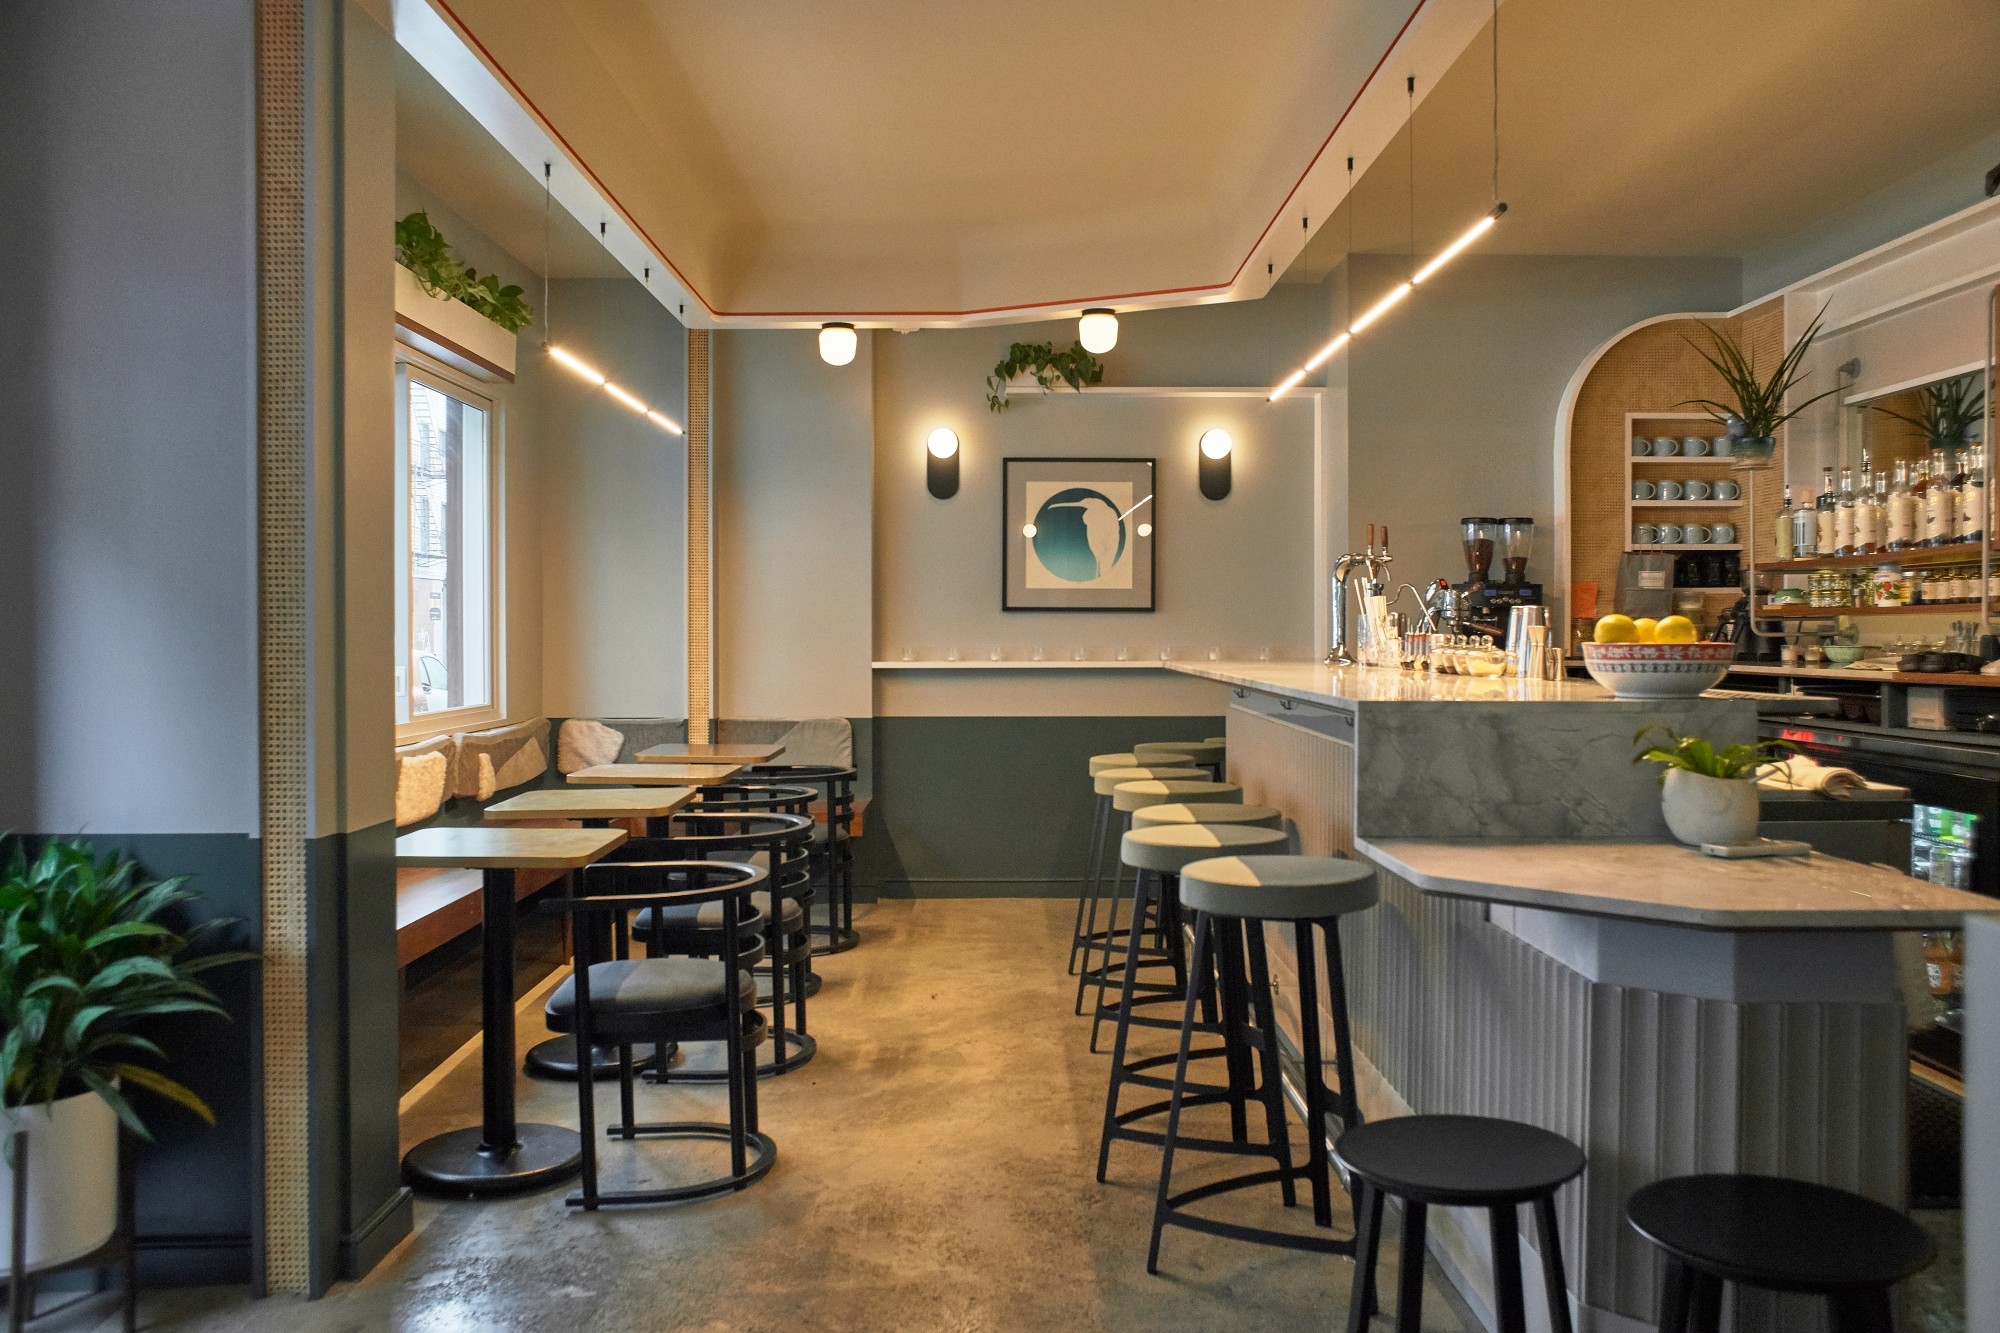 Getaway Brooklyn Features THIN Suspension in Alcohol-Free Bar